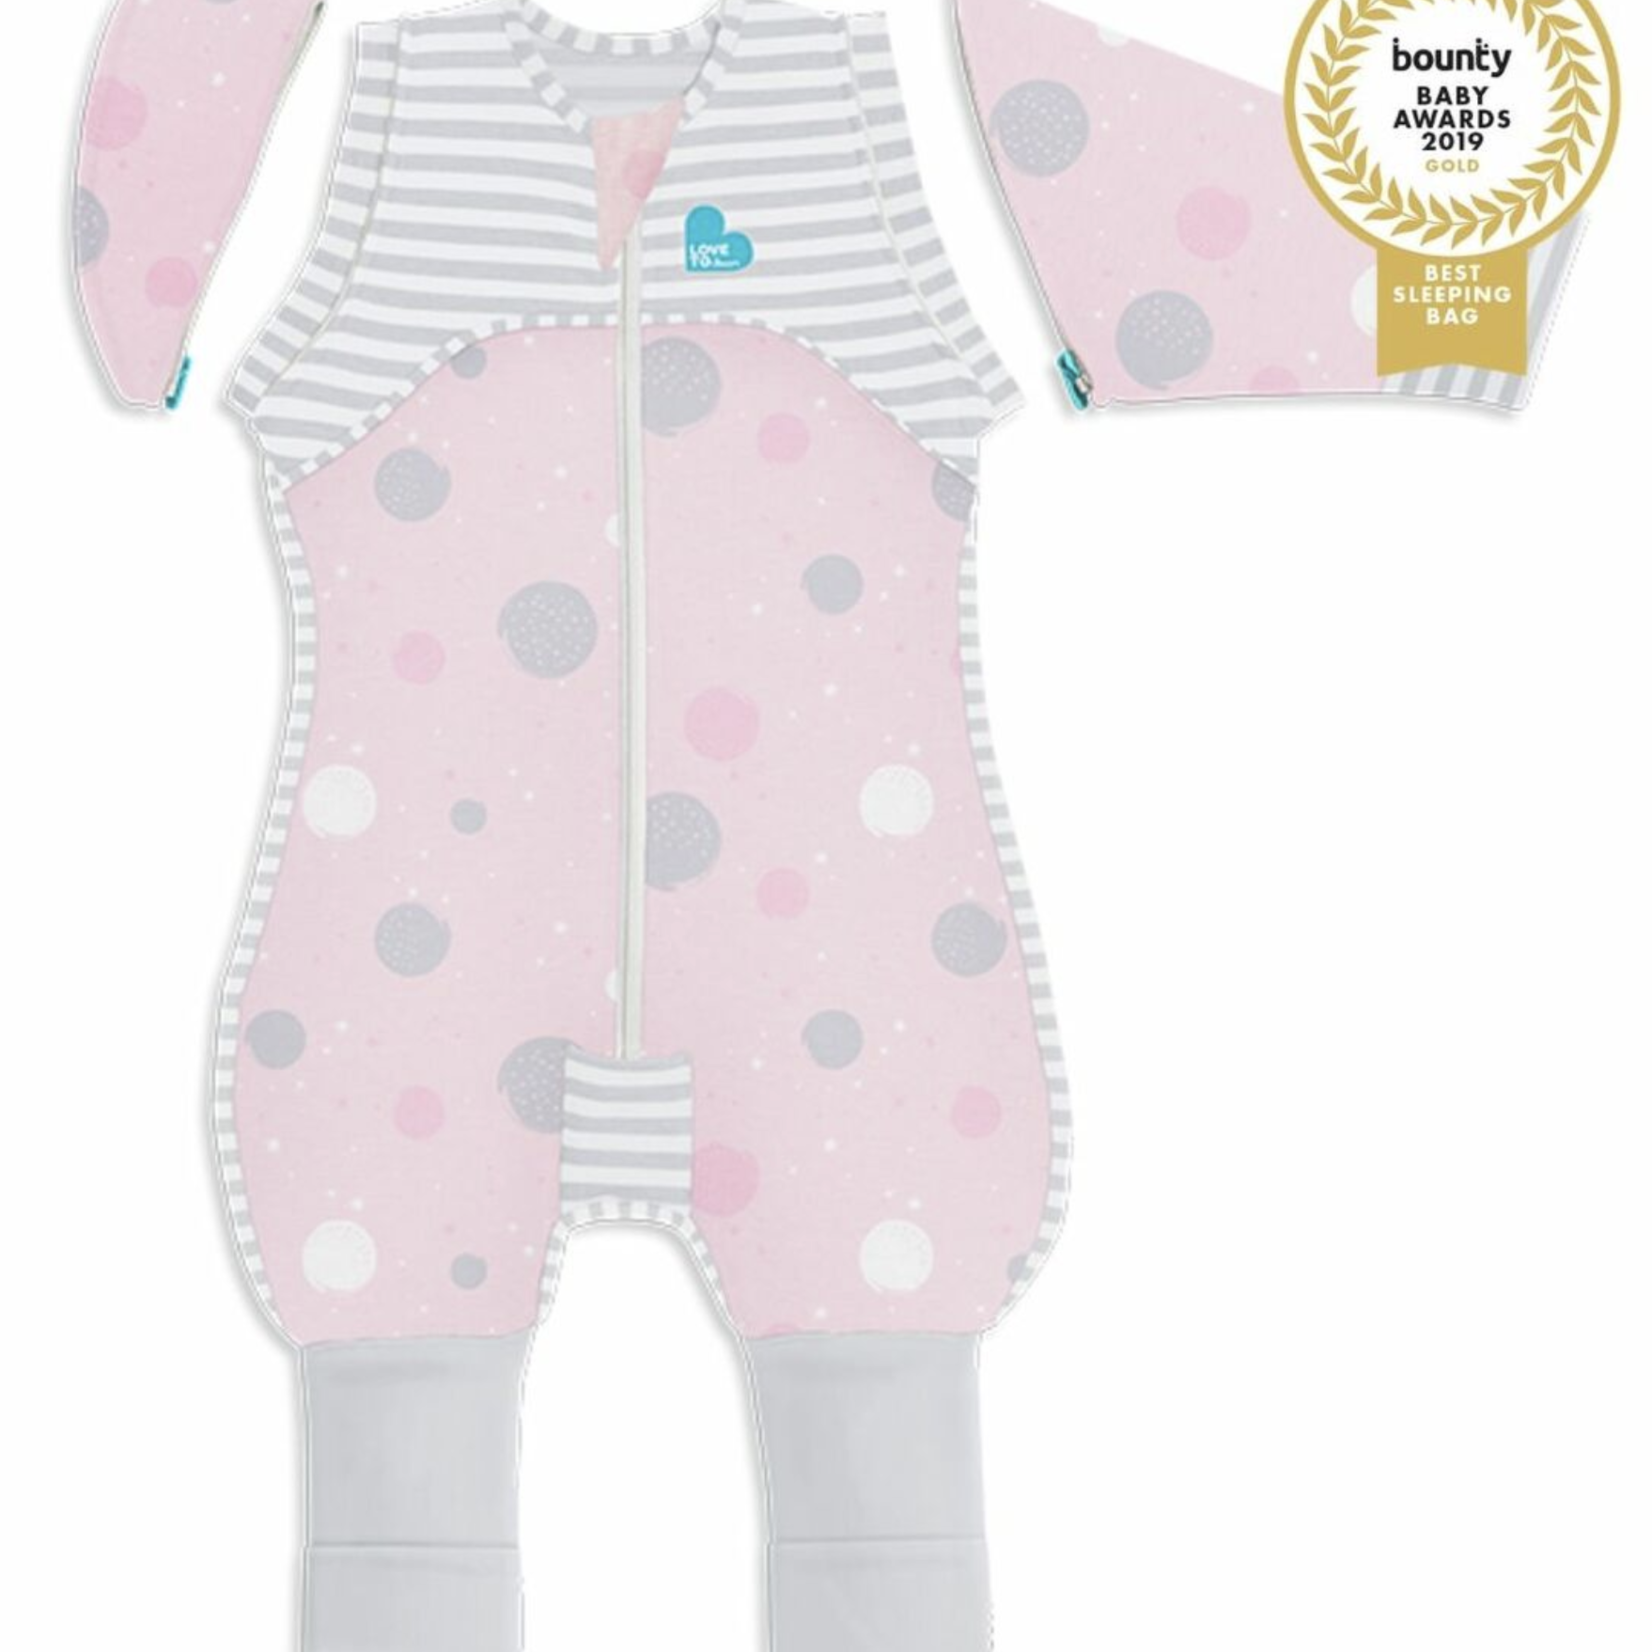 Love To Dream SWADDLE UP™ Transition Suit 0.2 T Pink-Multi Spots